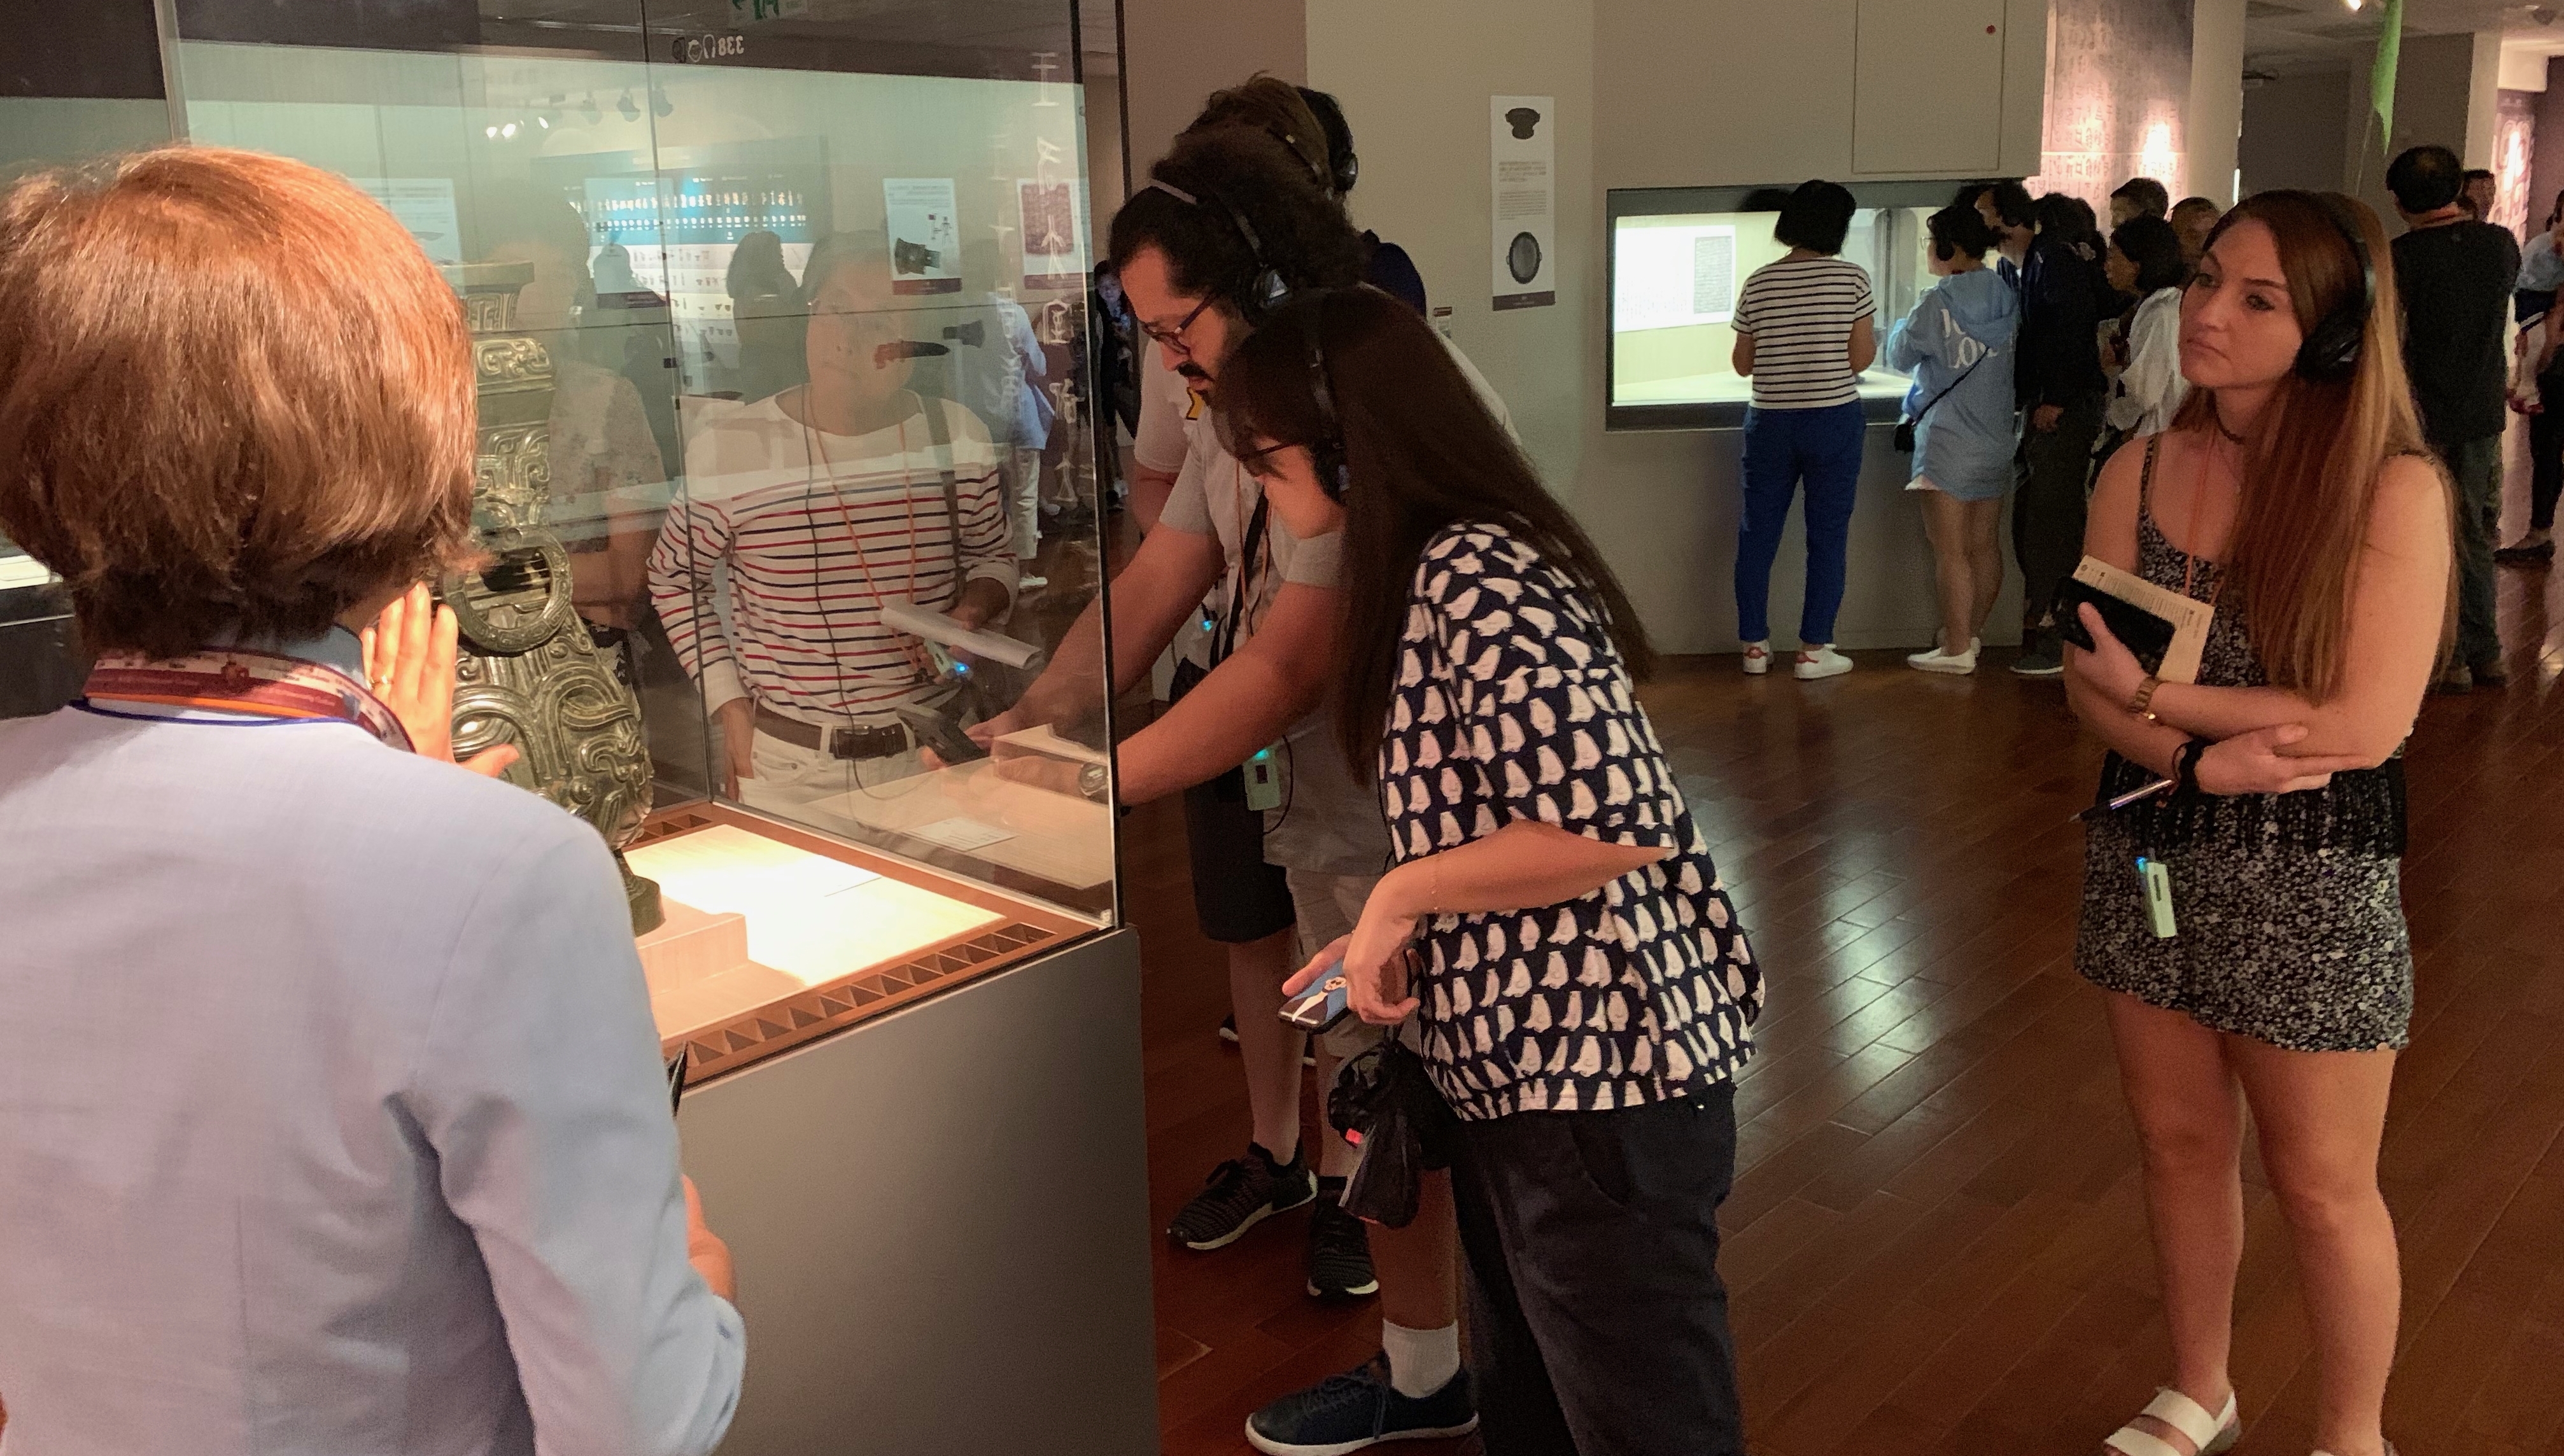 Students look at an ancient artifact displayed in an art museum